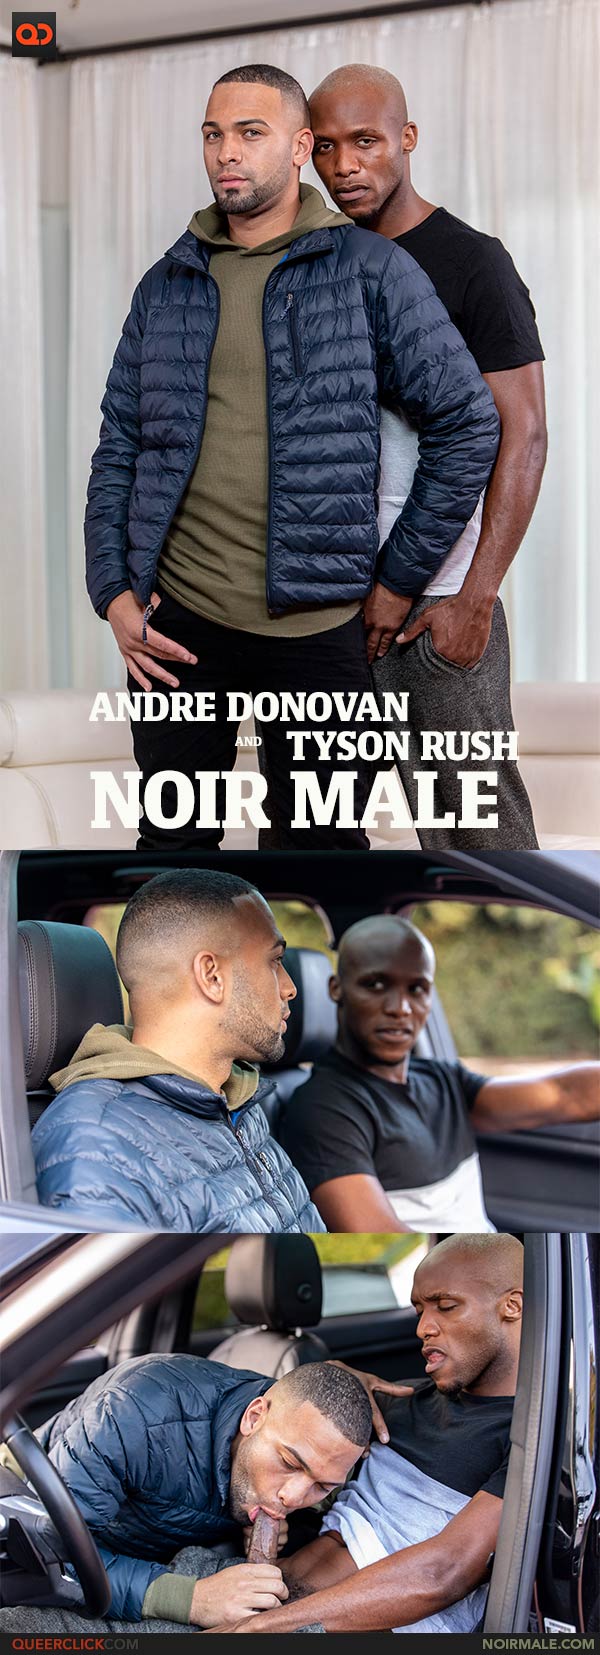 NoirMale: Andre Donovan and Tyson Rush